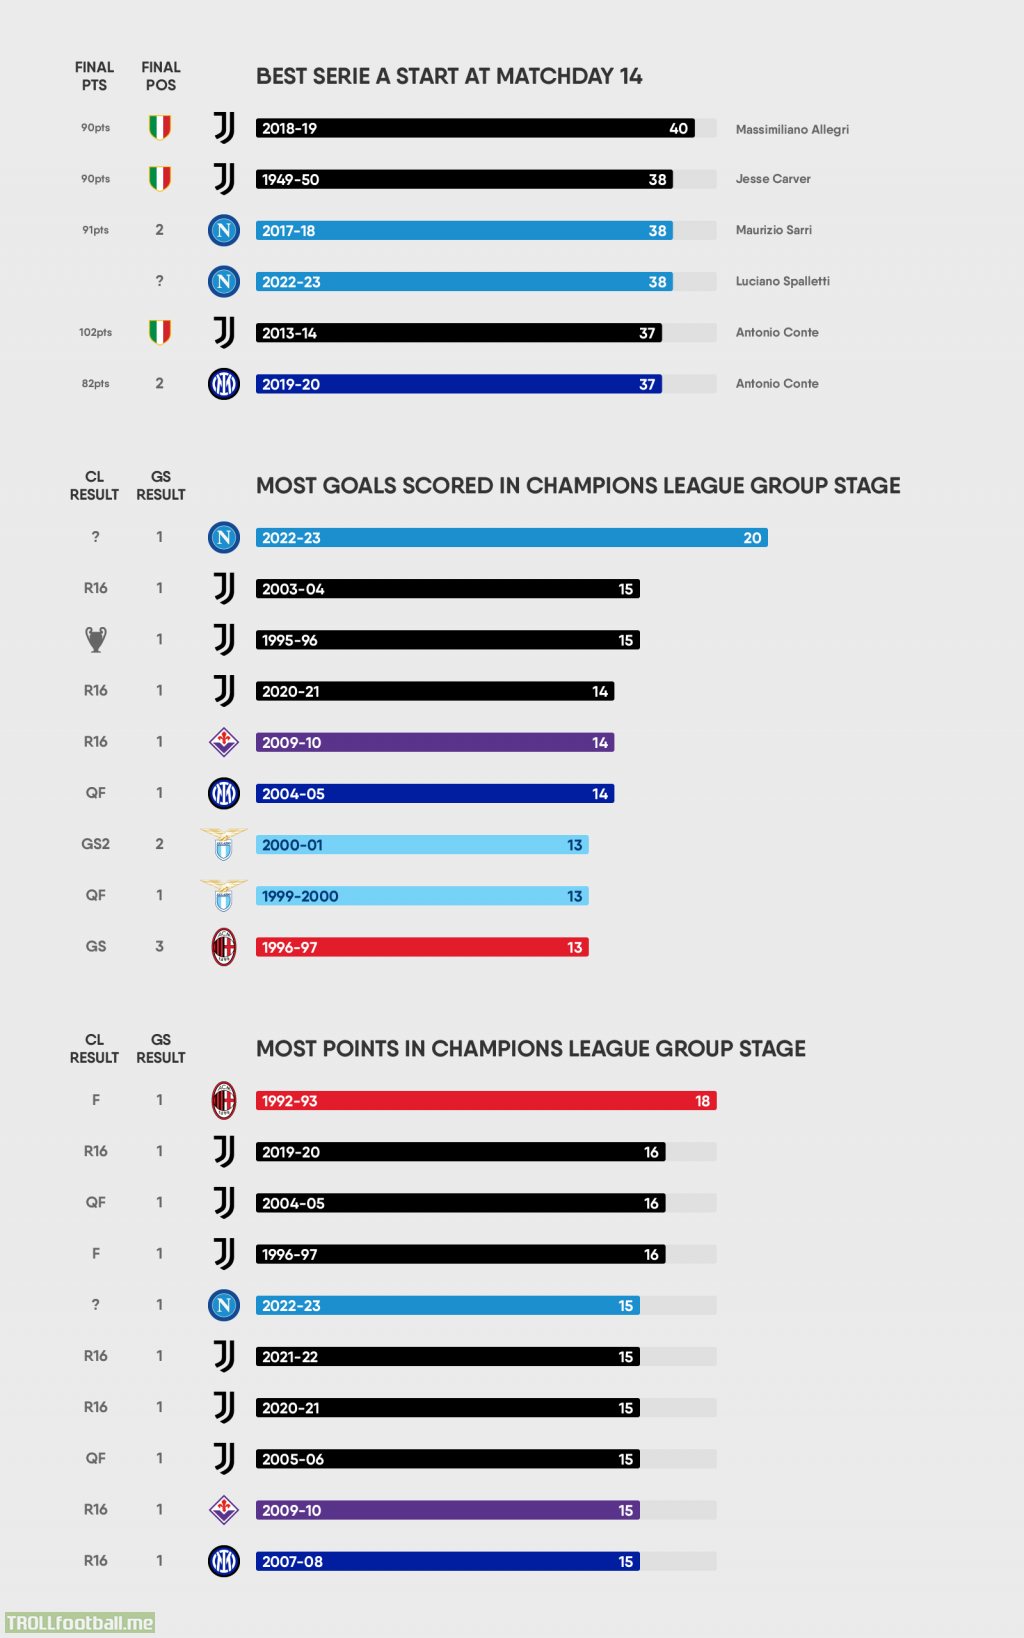 Best Serie A start at matchday 14, and most points and goals in CL group stage by italian clubs